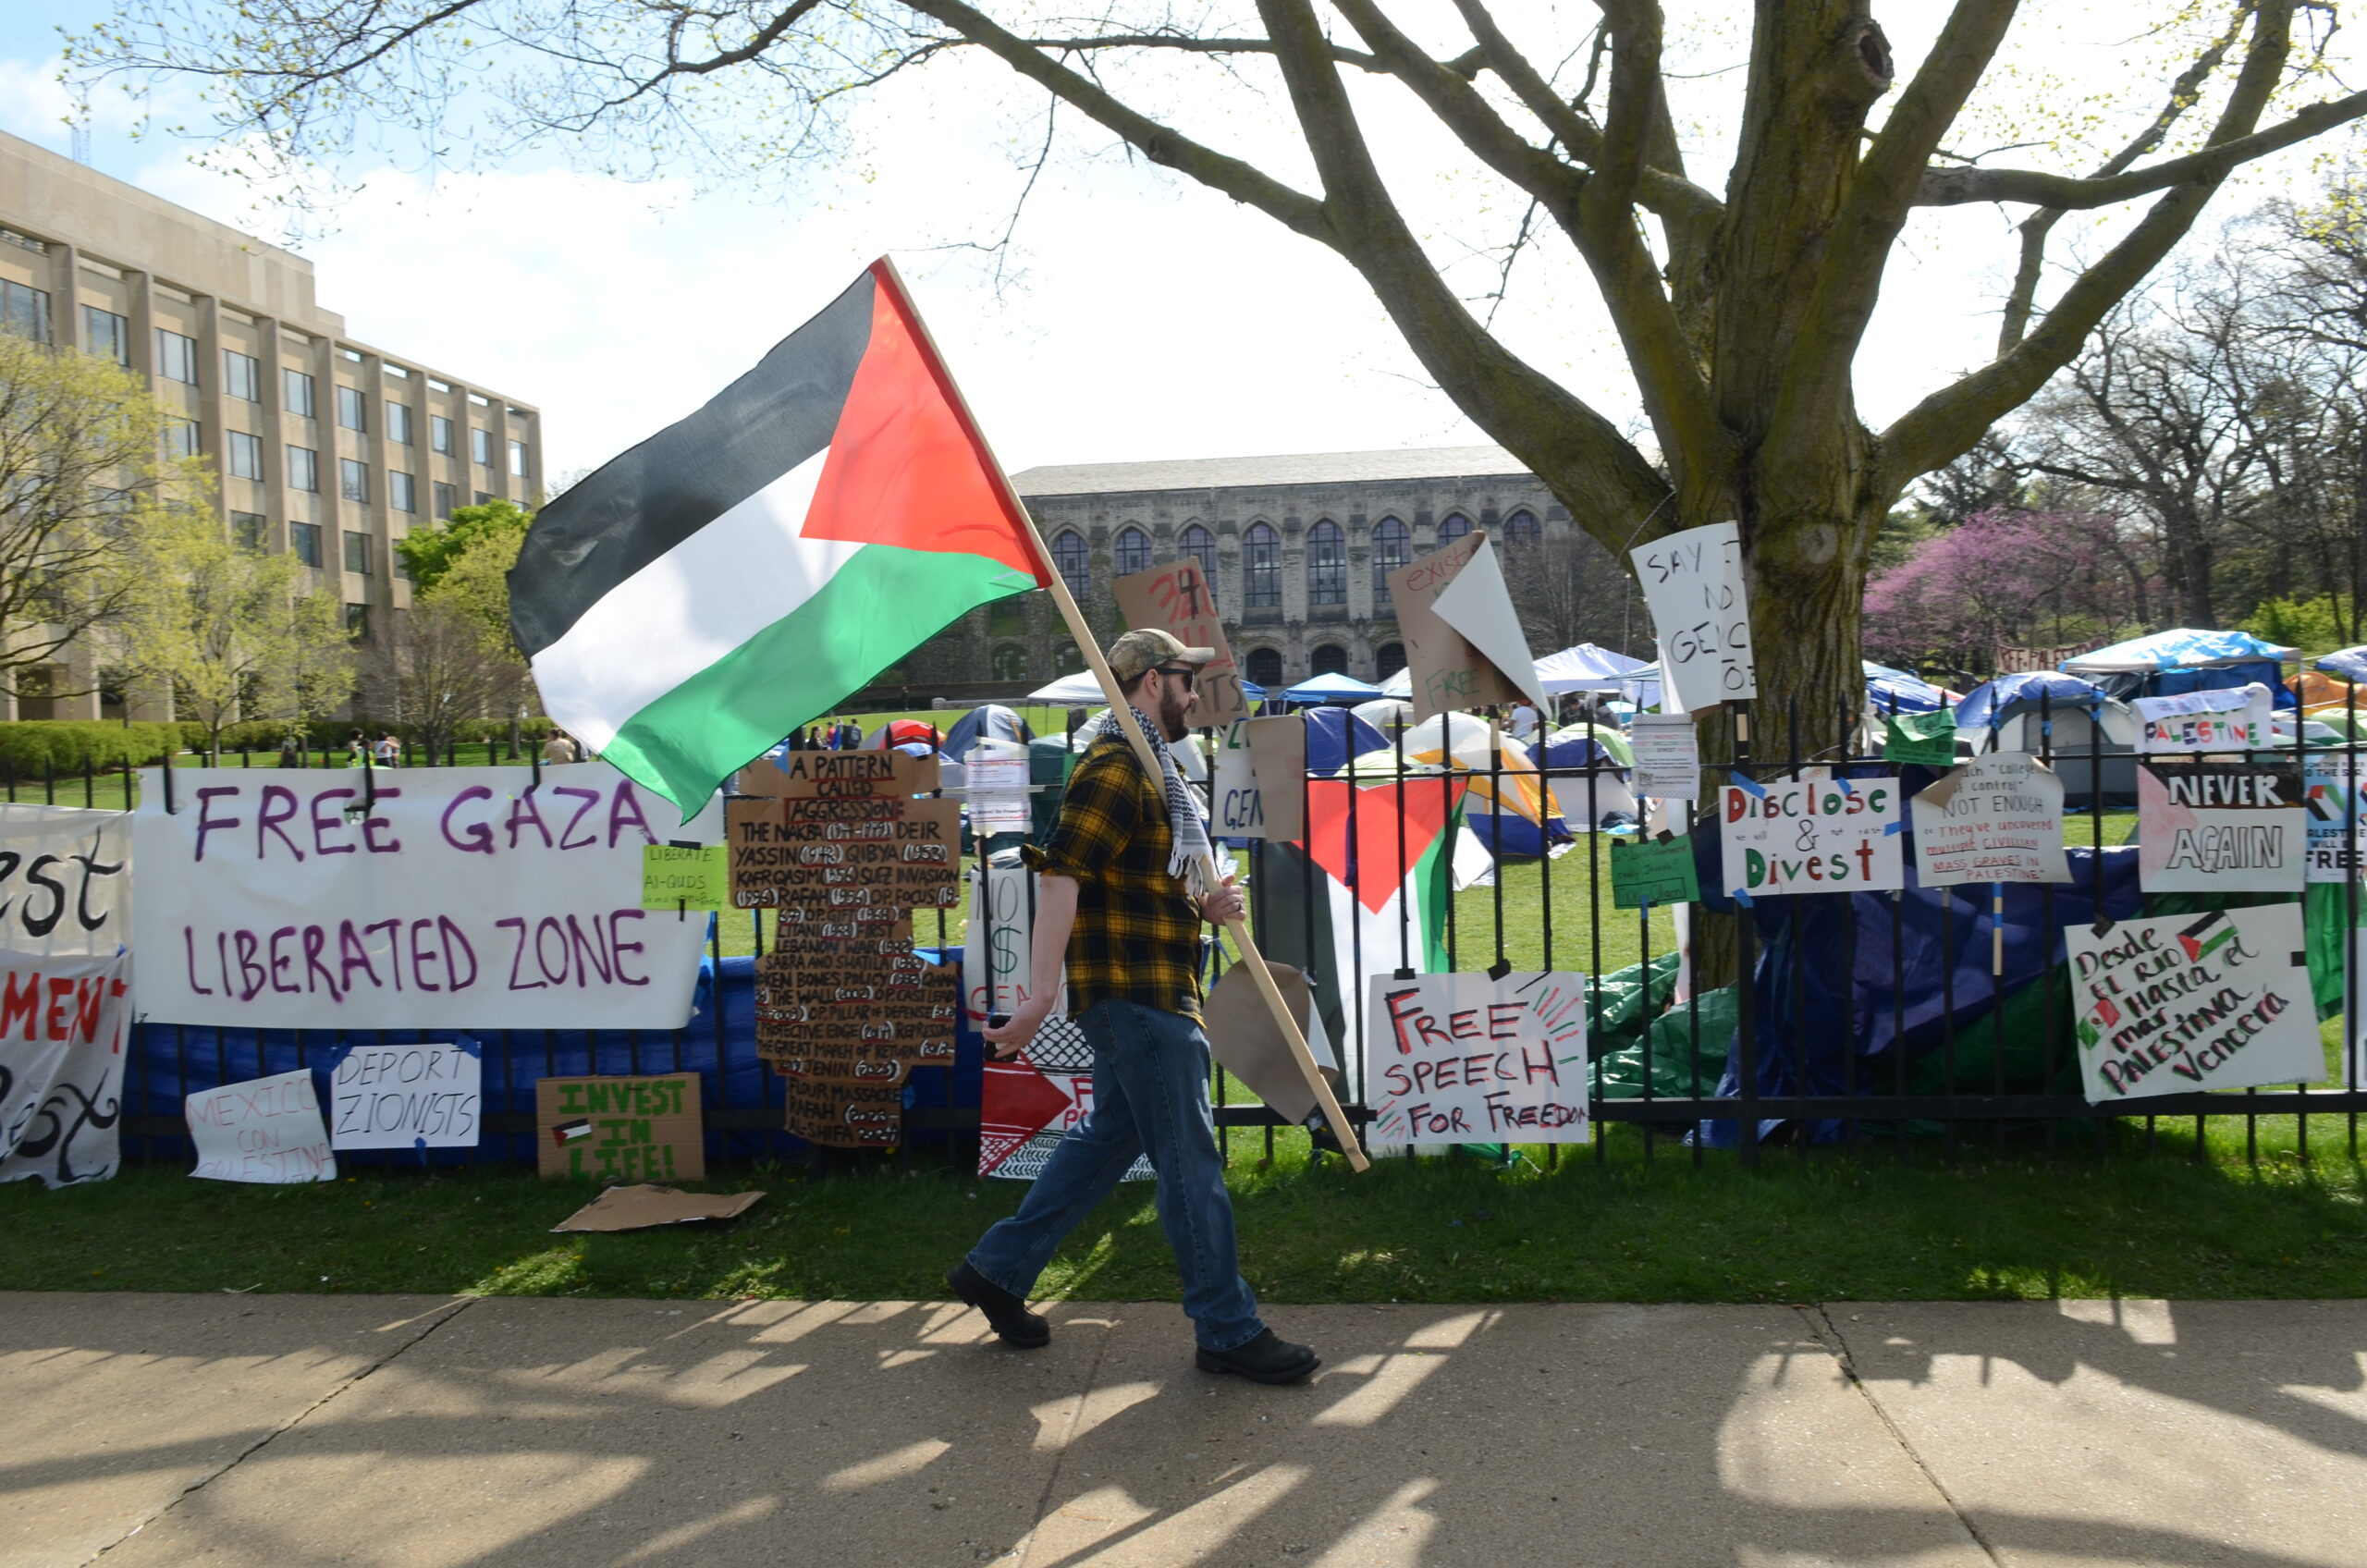 Northwestern University Caves To Anti-Israel Protesters, Granting Numerous Demands